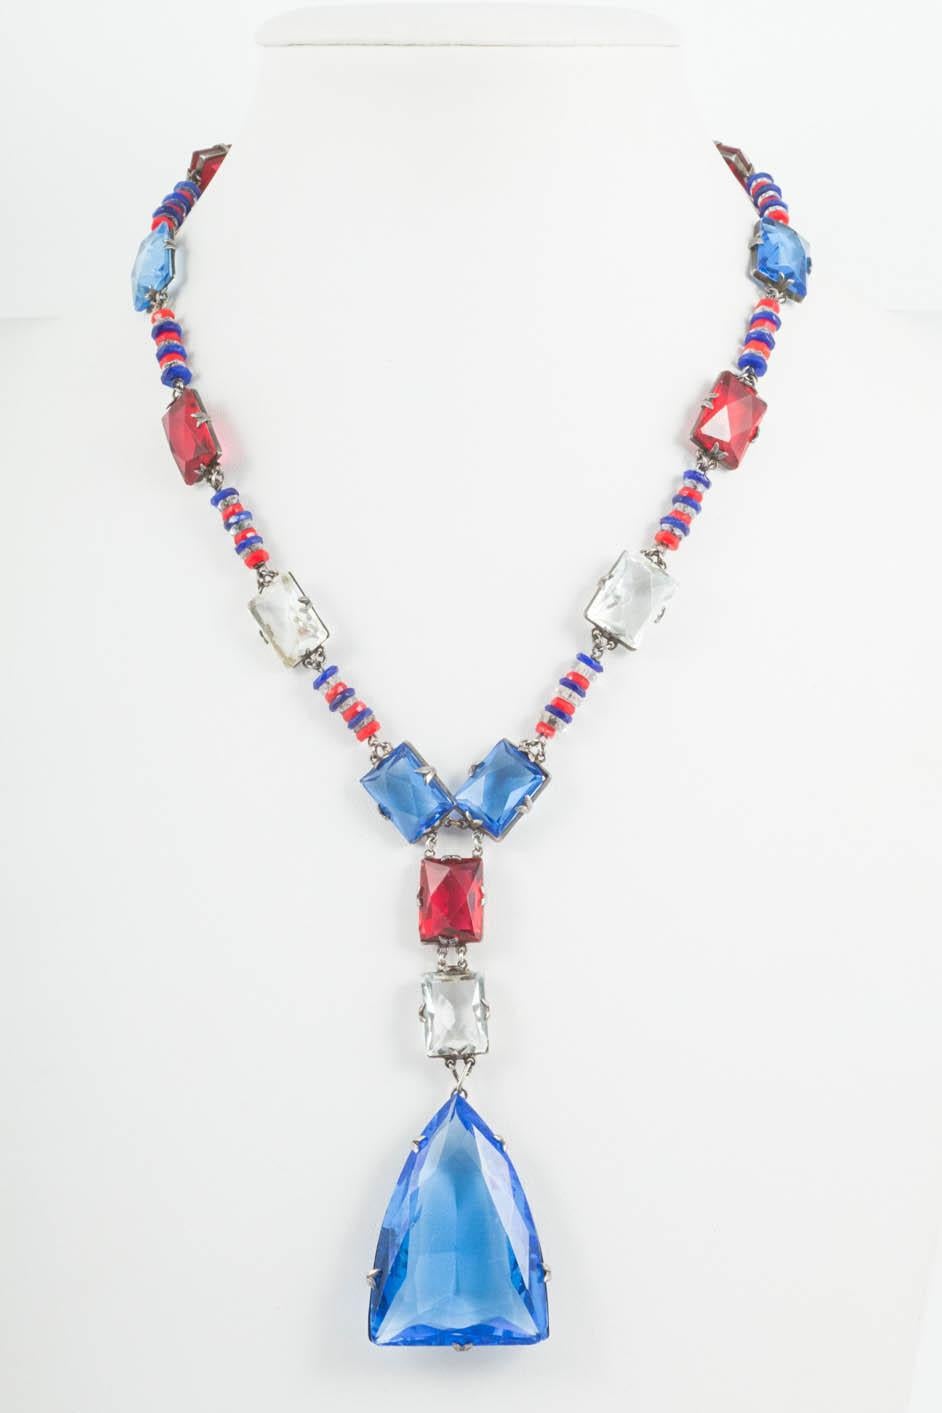 A stylish sautoir necklace , with red, blue and clear glass of assorted shapes and sizes, all hand set in silver, made in France, during the Art Deco years. A classic, timeless necklace, highly wearable, through all seasons.